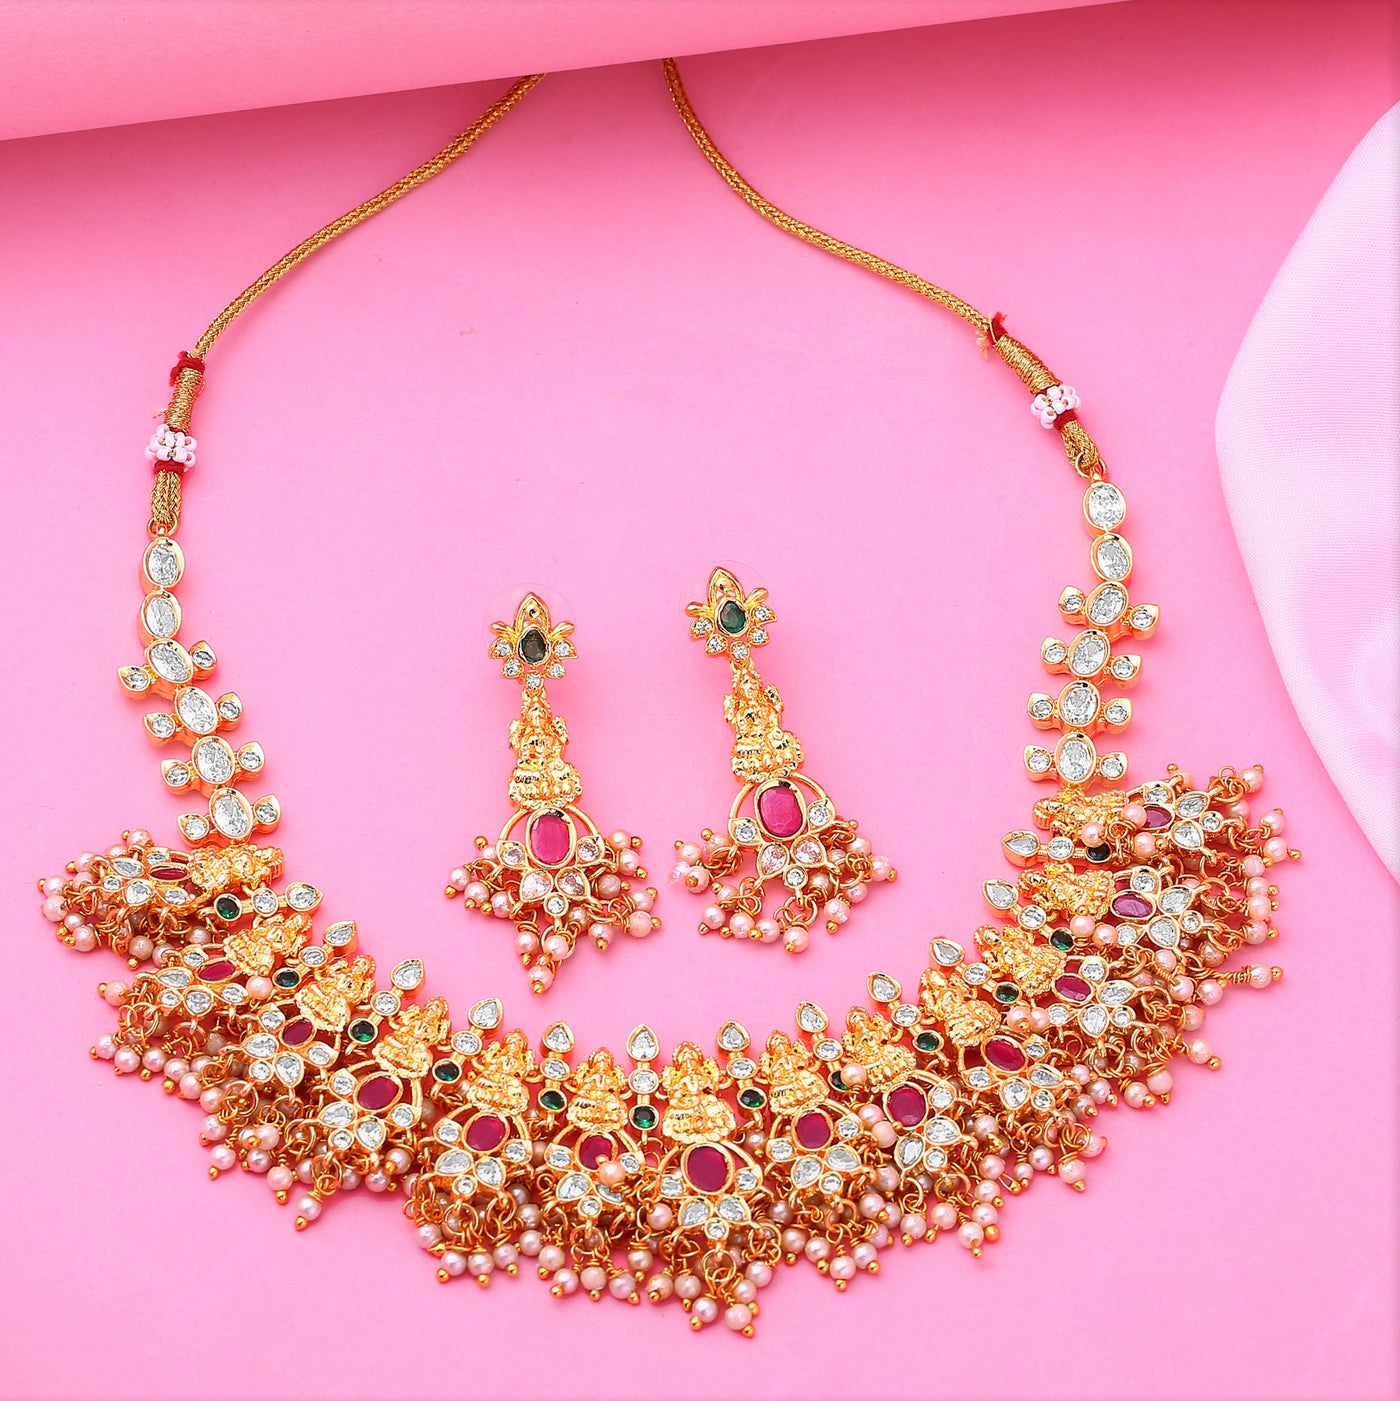 Estele Gold Plated CZ Bridal Necklace Set with Colored Crystals & Intricate Pearl Work for Women